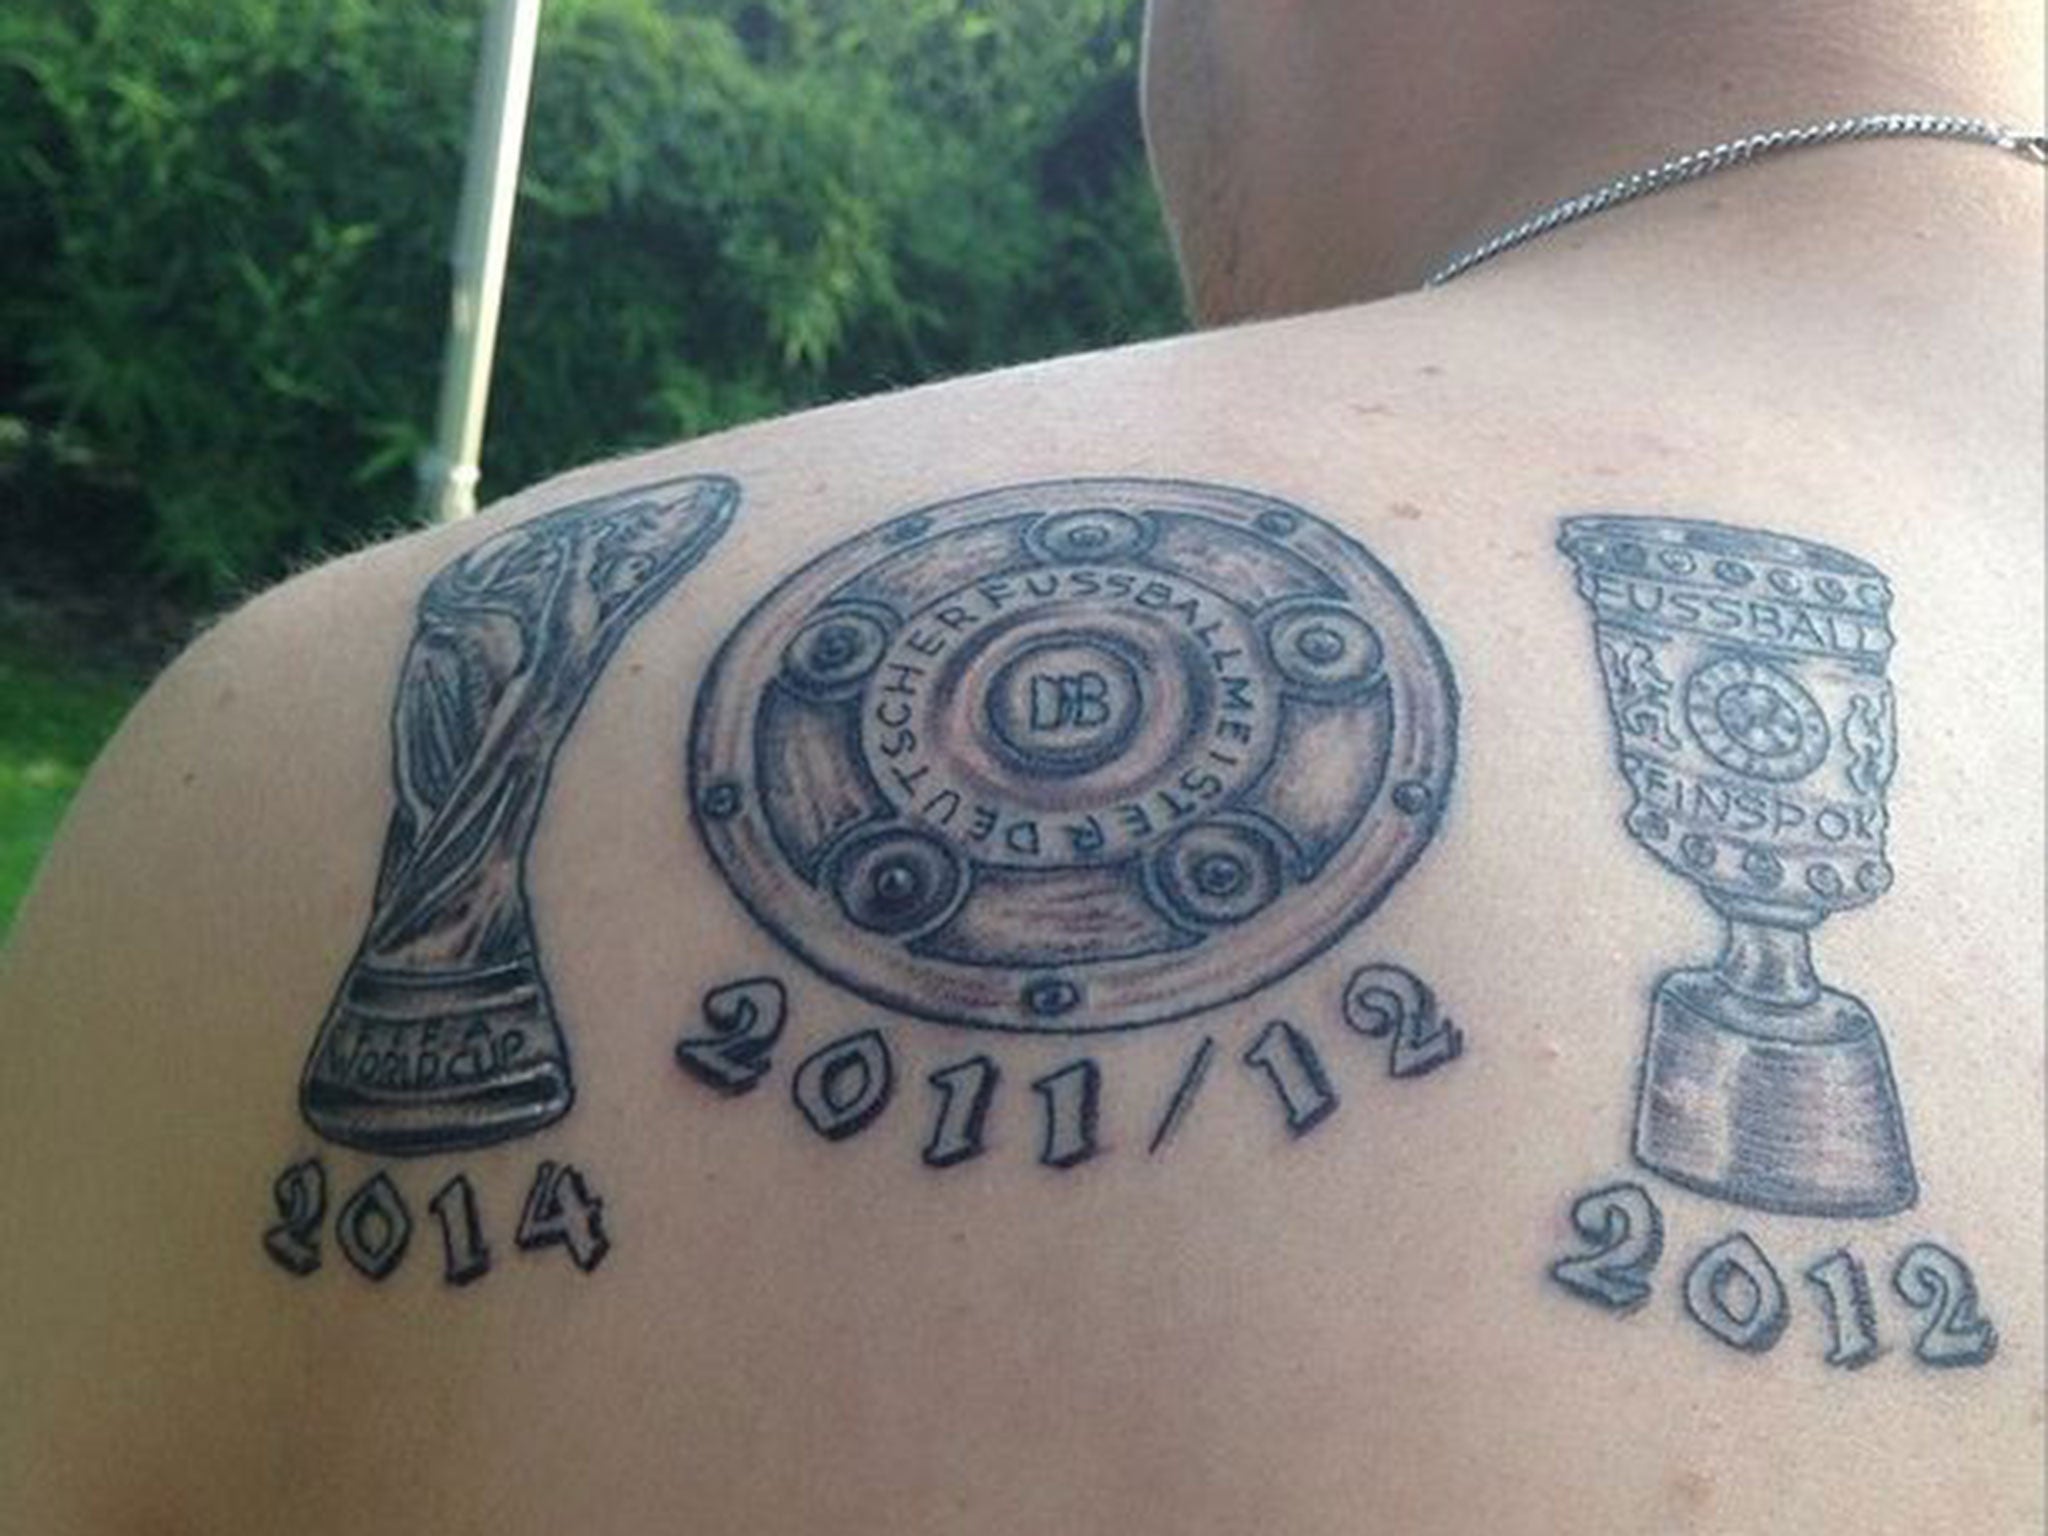 Kevin Grosskreutz shows off his World Cup tattoo even though he didn't play a minute in Brazil